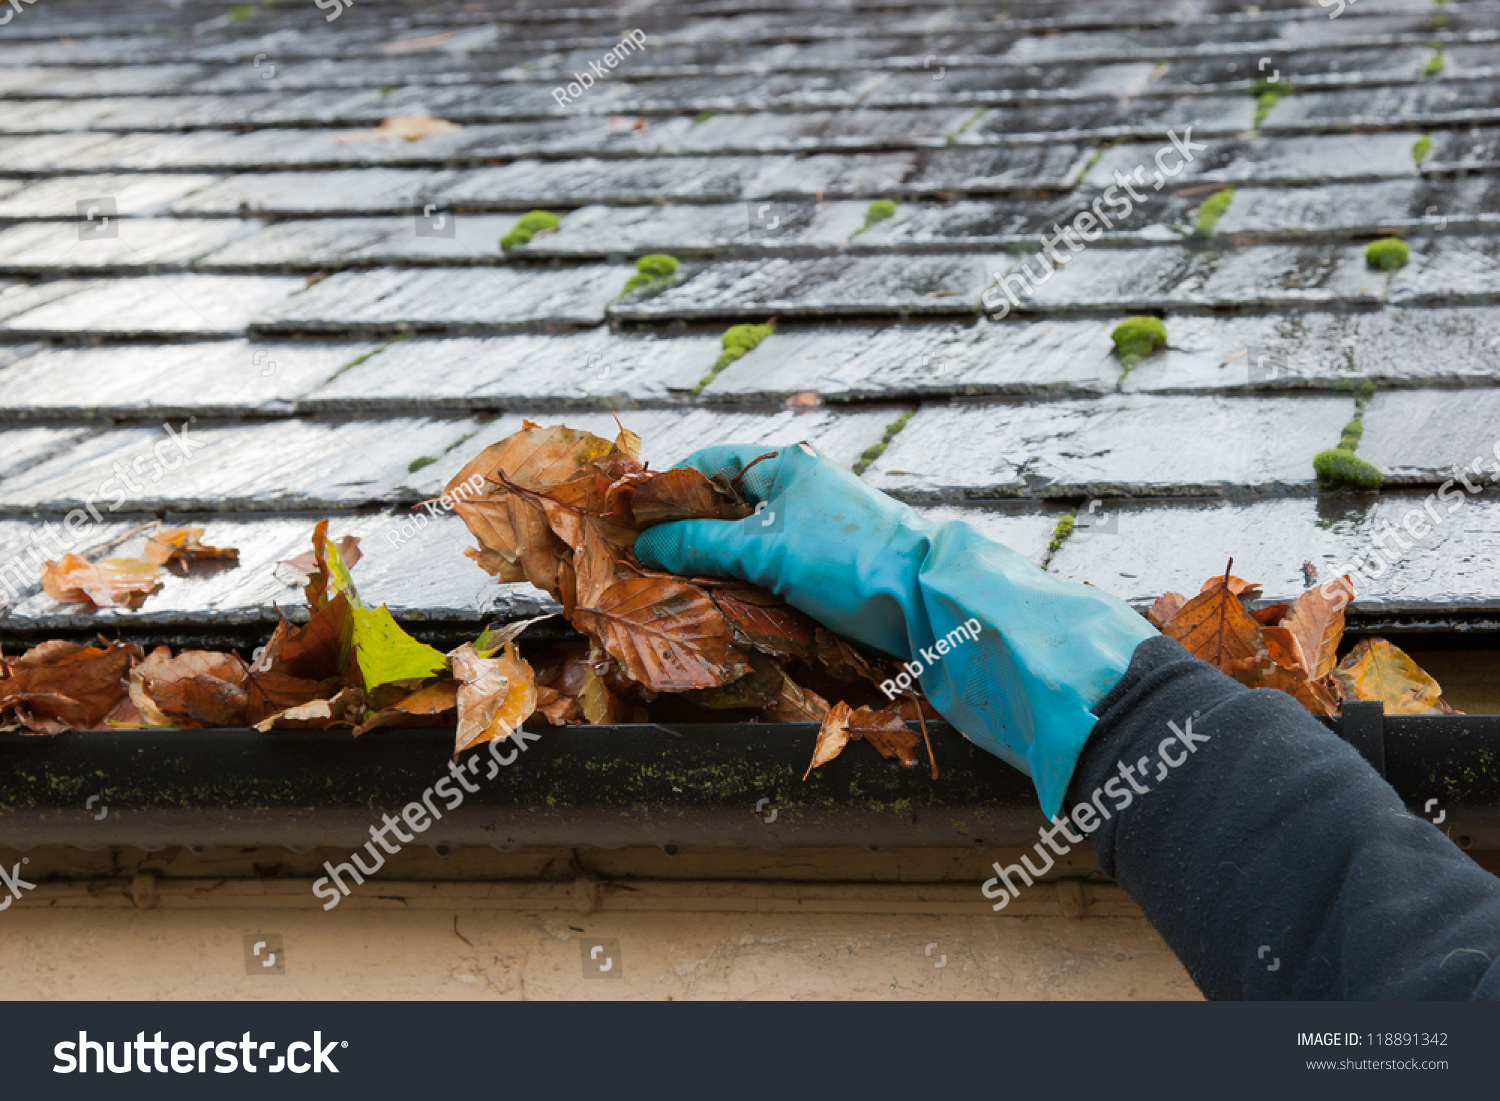 Clearing autumn gutter blocked with leaves by hand #118891342